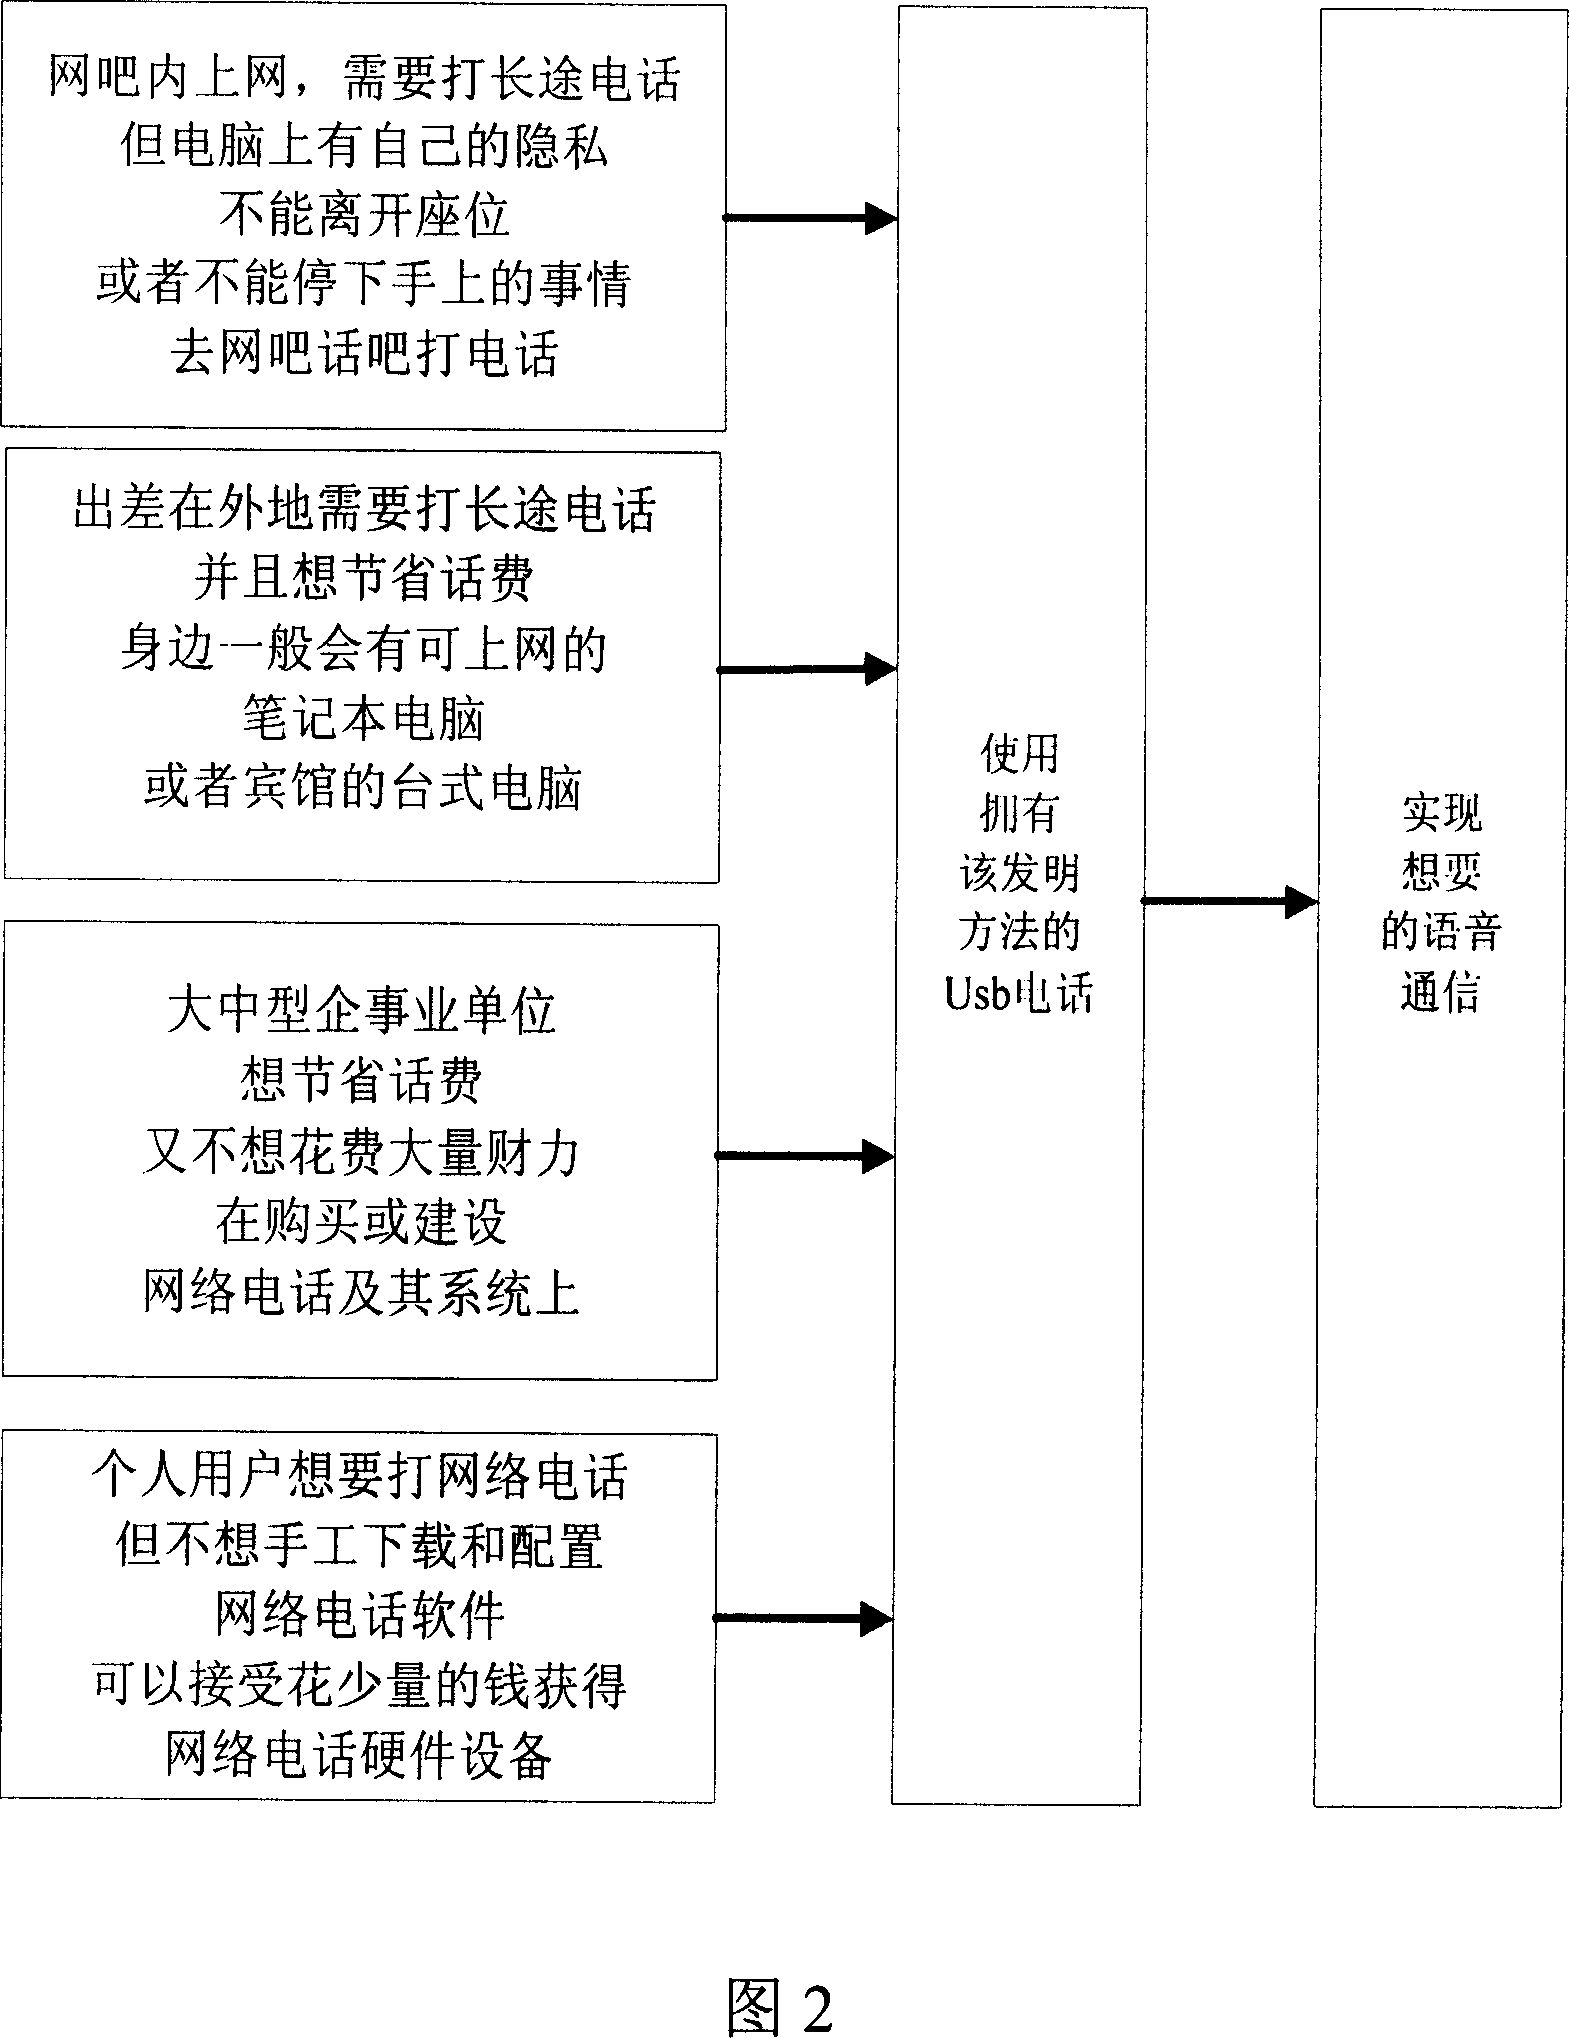 Method for making USB telephone UPNP carry out speech communication by on-line computer